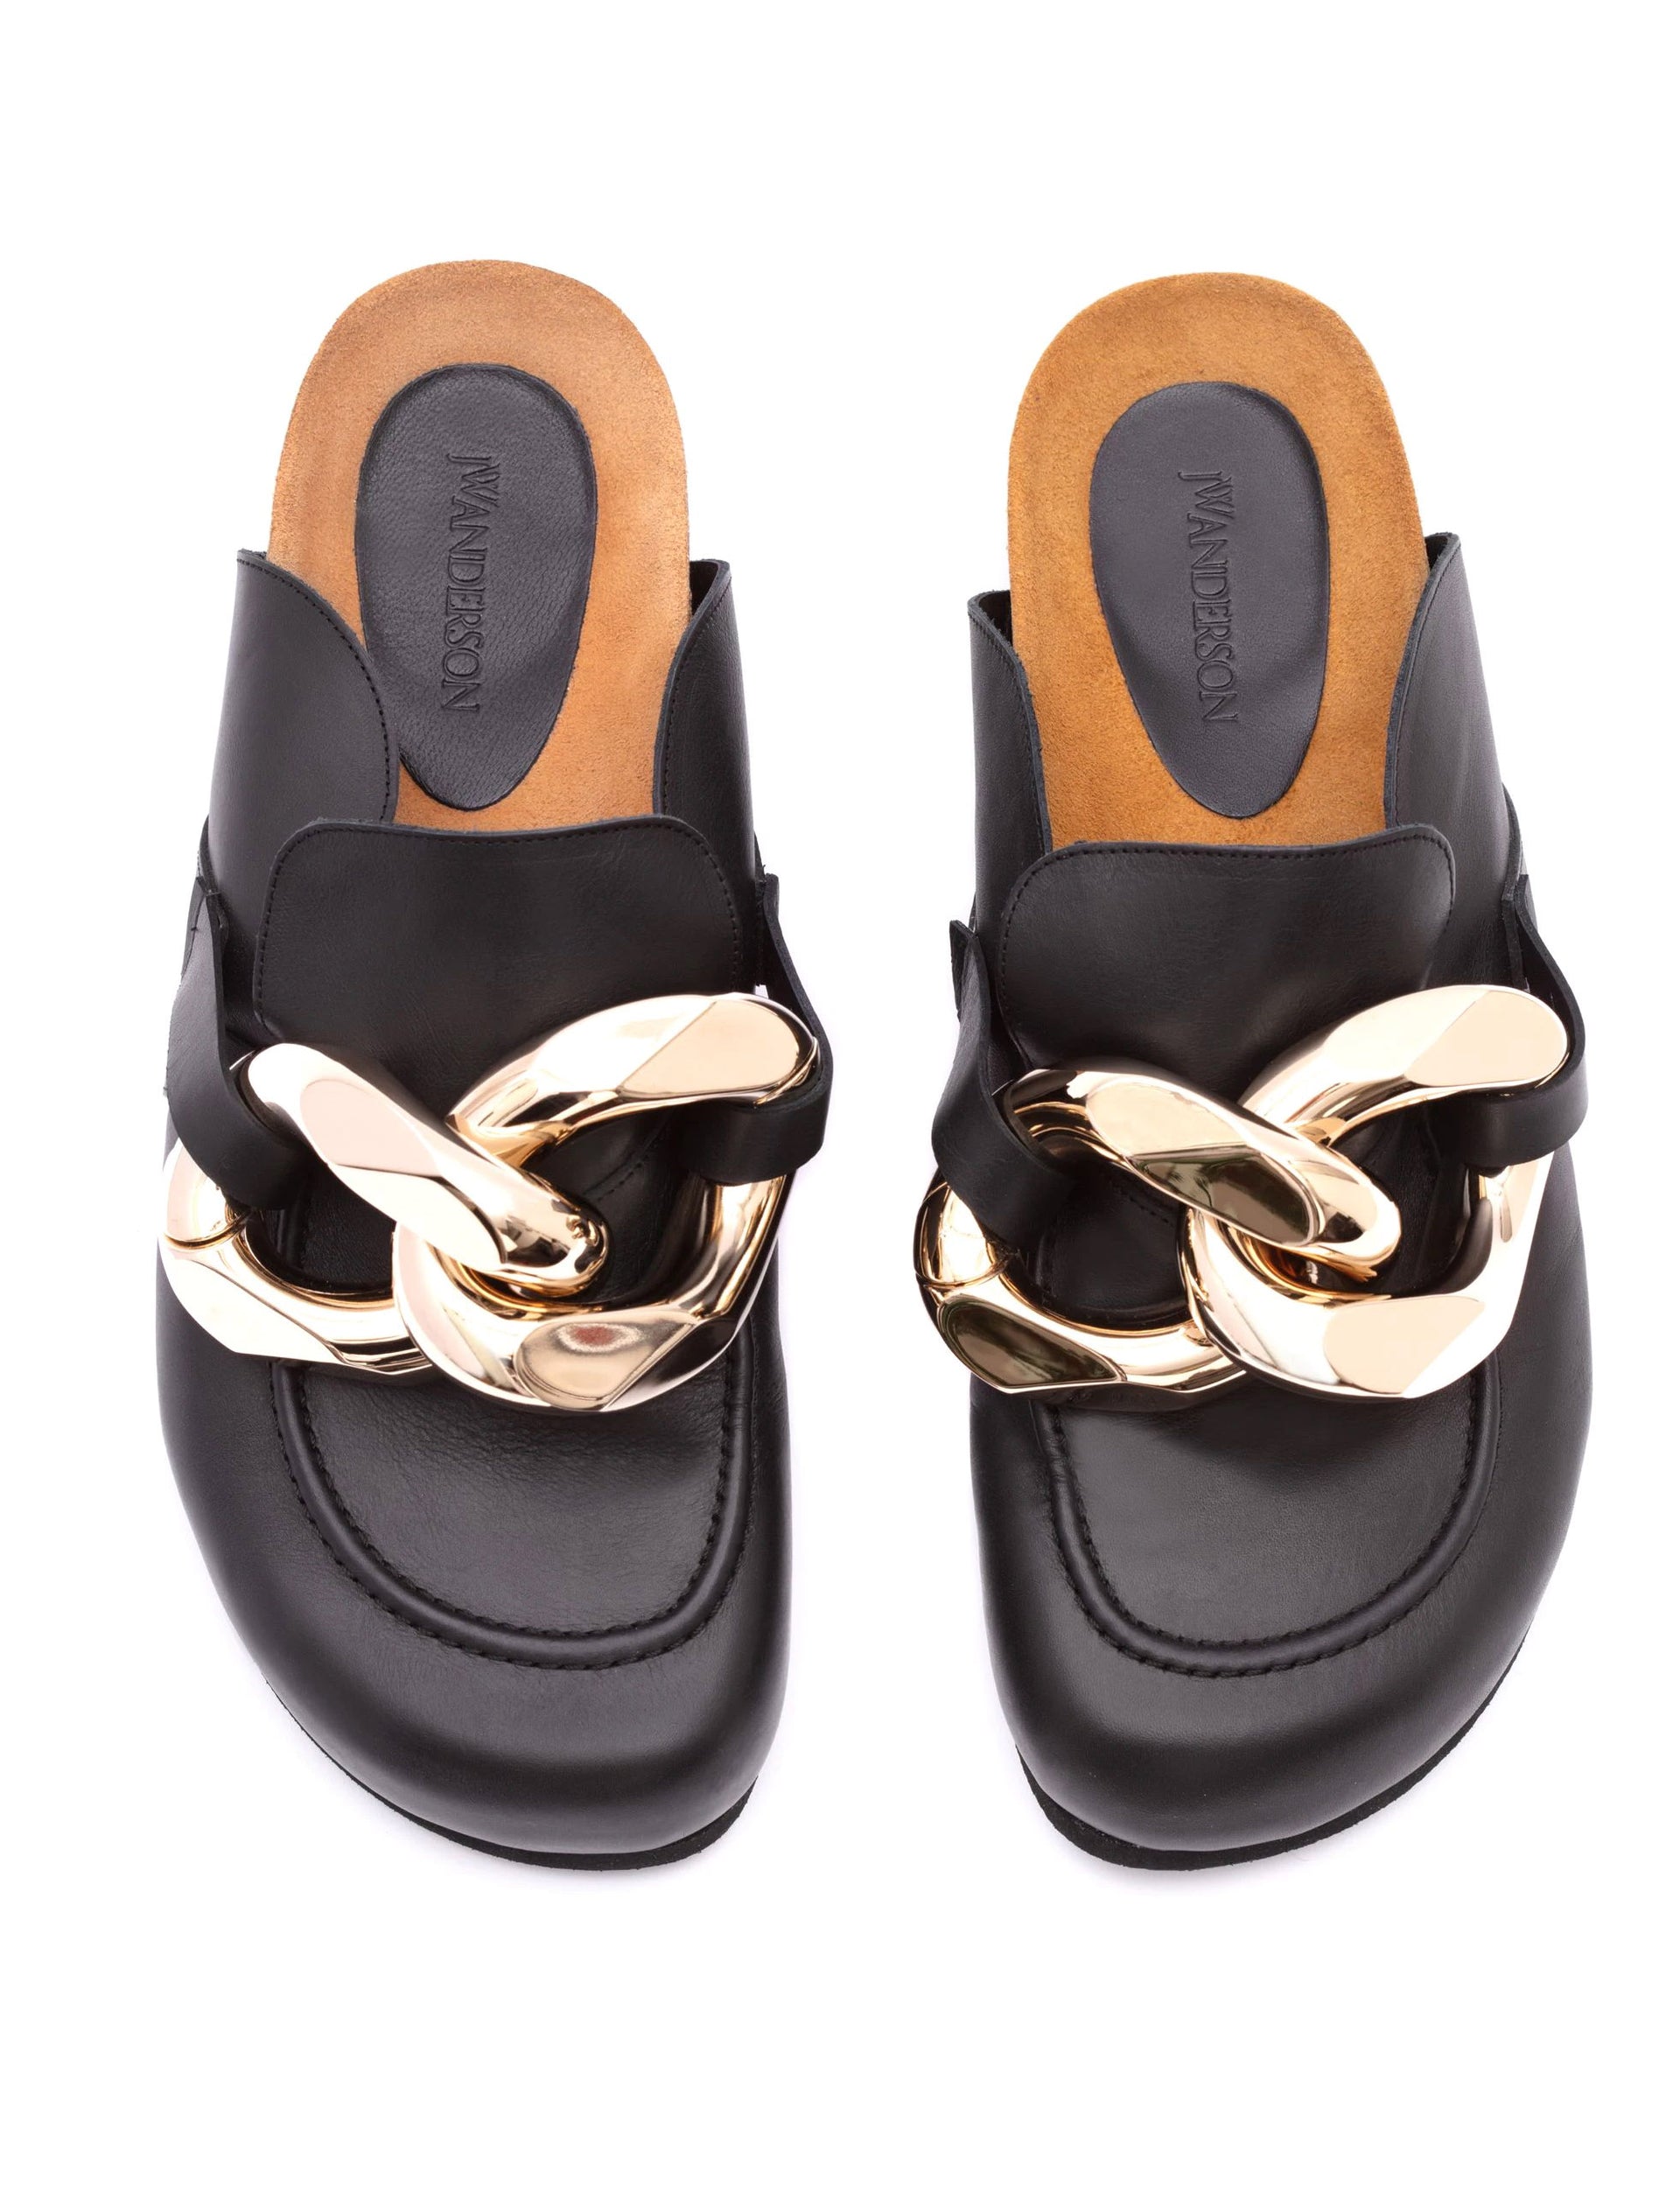 JW ANDERSON MEN’S CHAIN LOAFER MULES